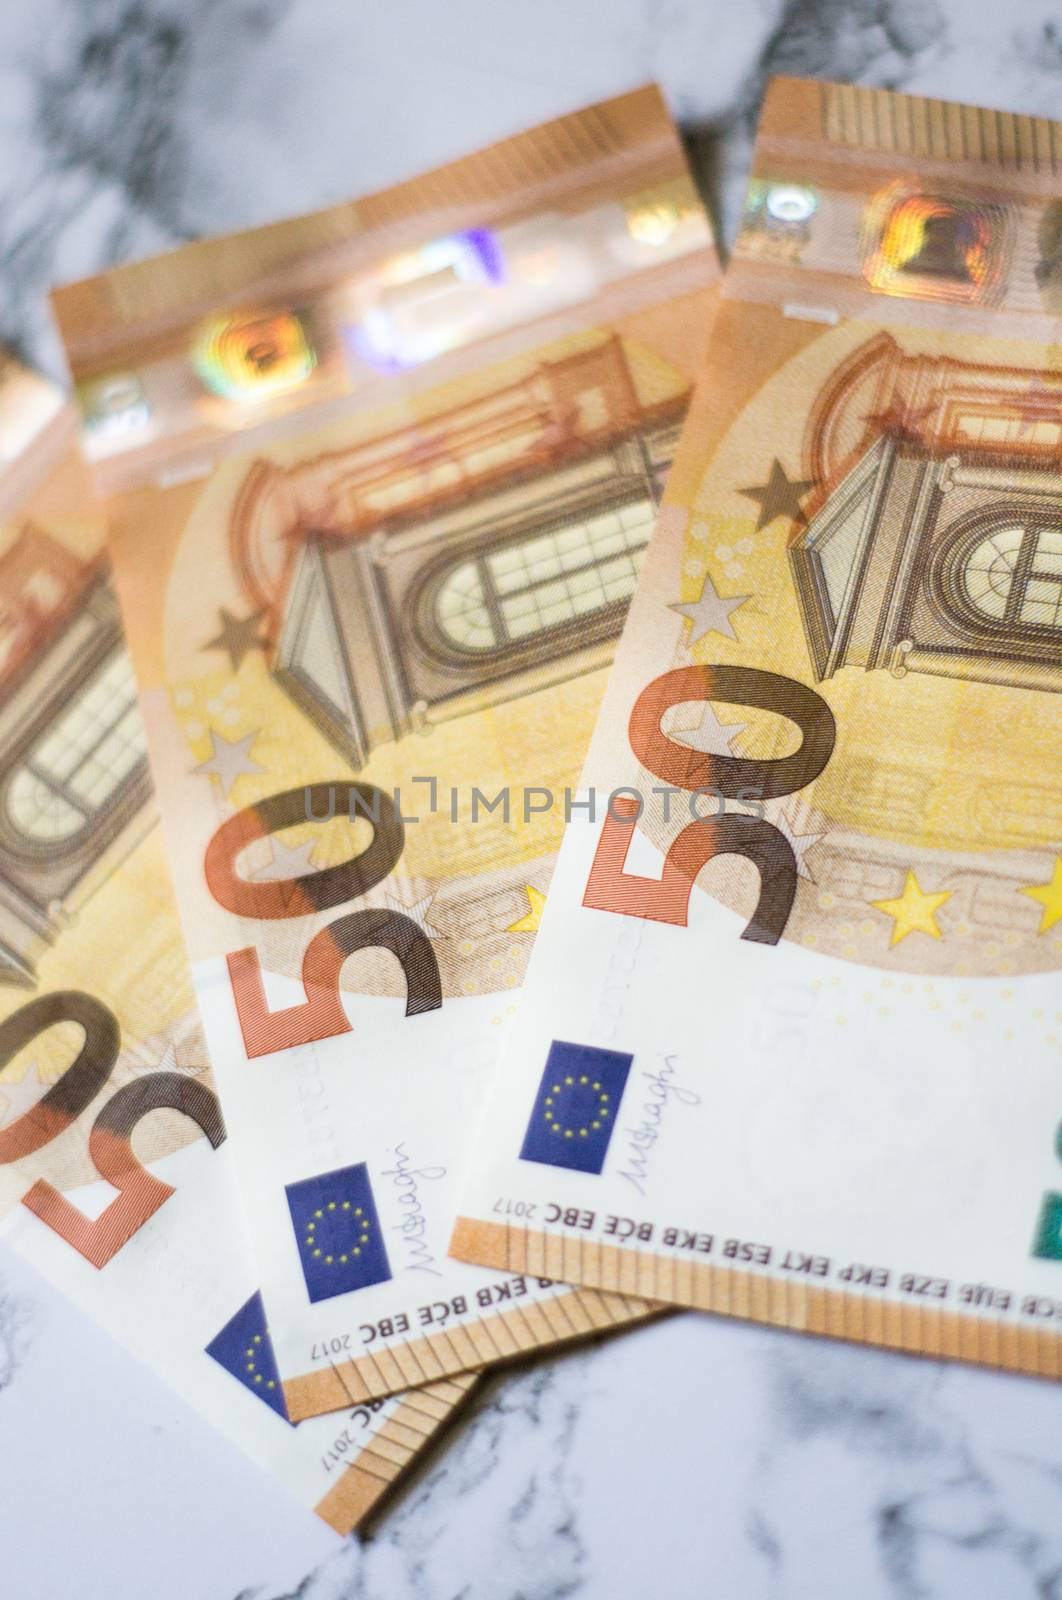 50 euro banknote close-up on marbel background